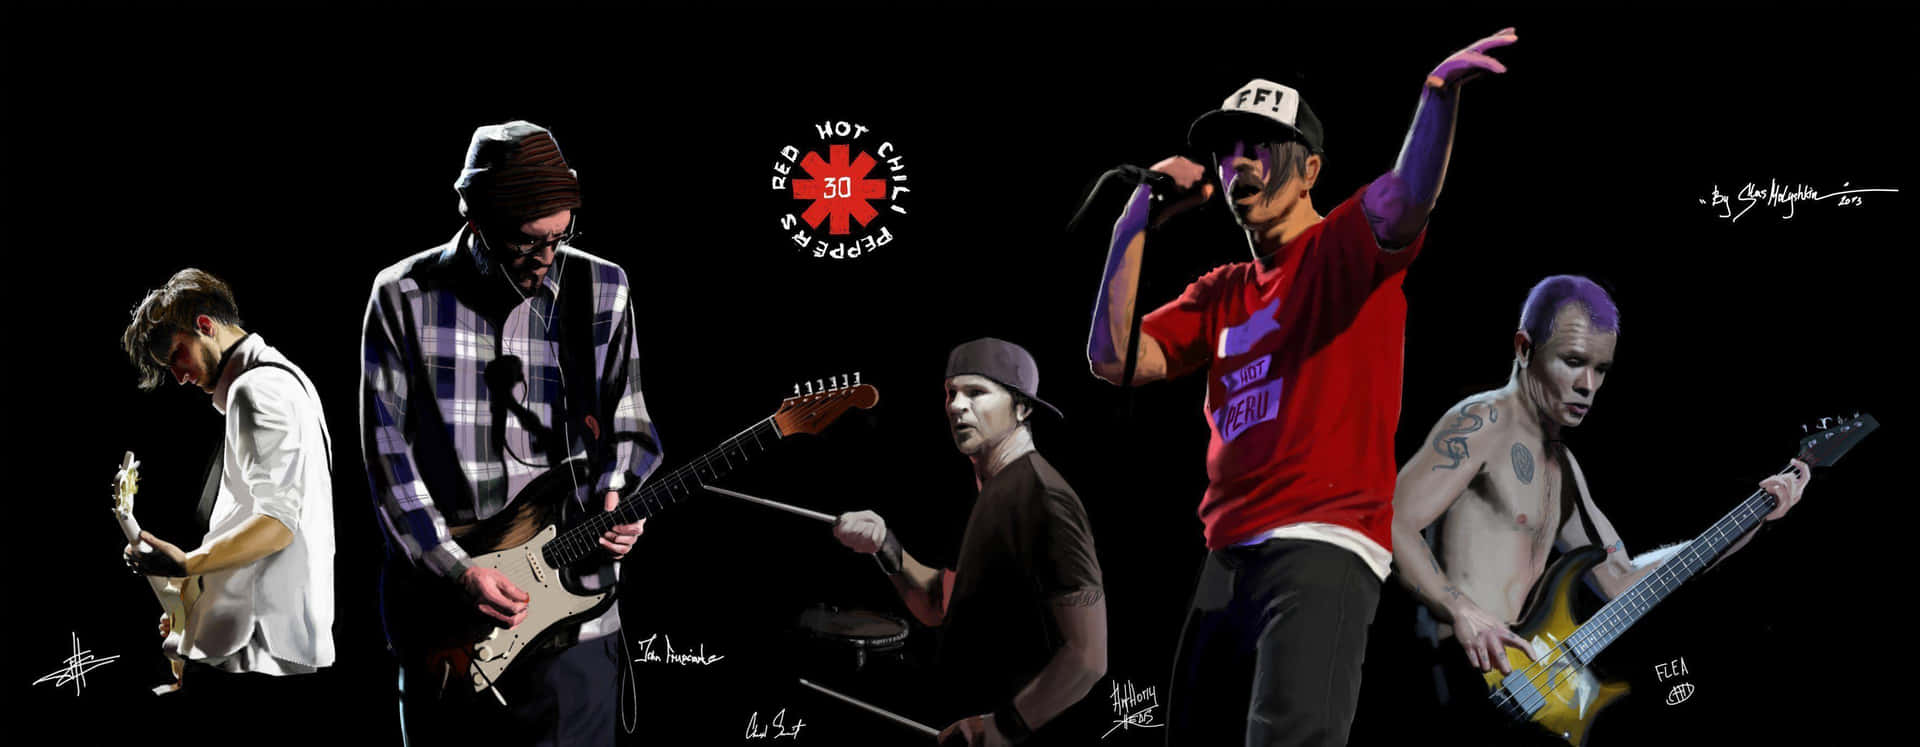 Red Hot Chili Peppers take the stage to rock their adoring fans Wallpaper